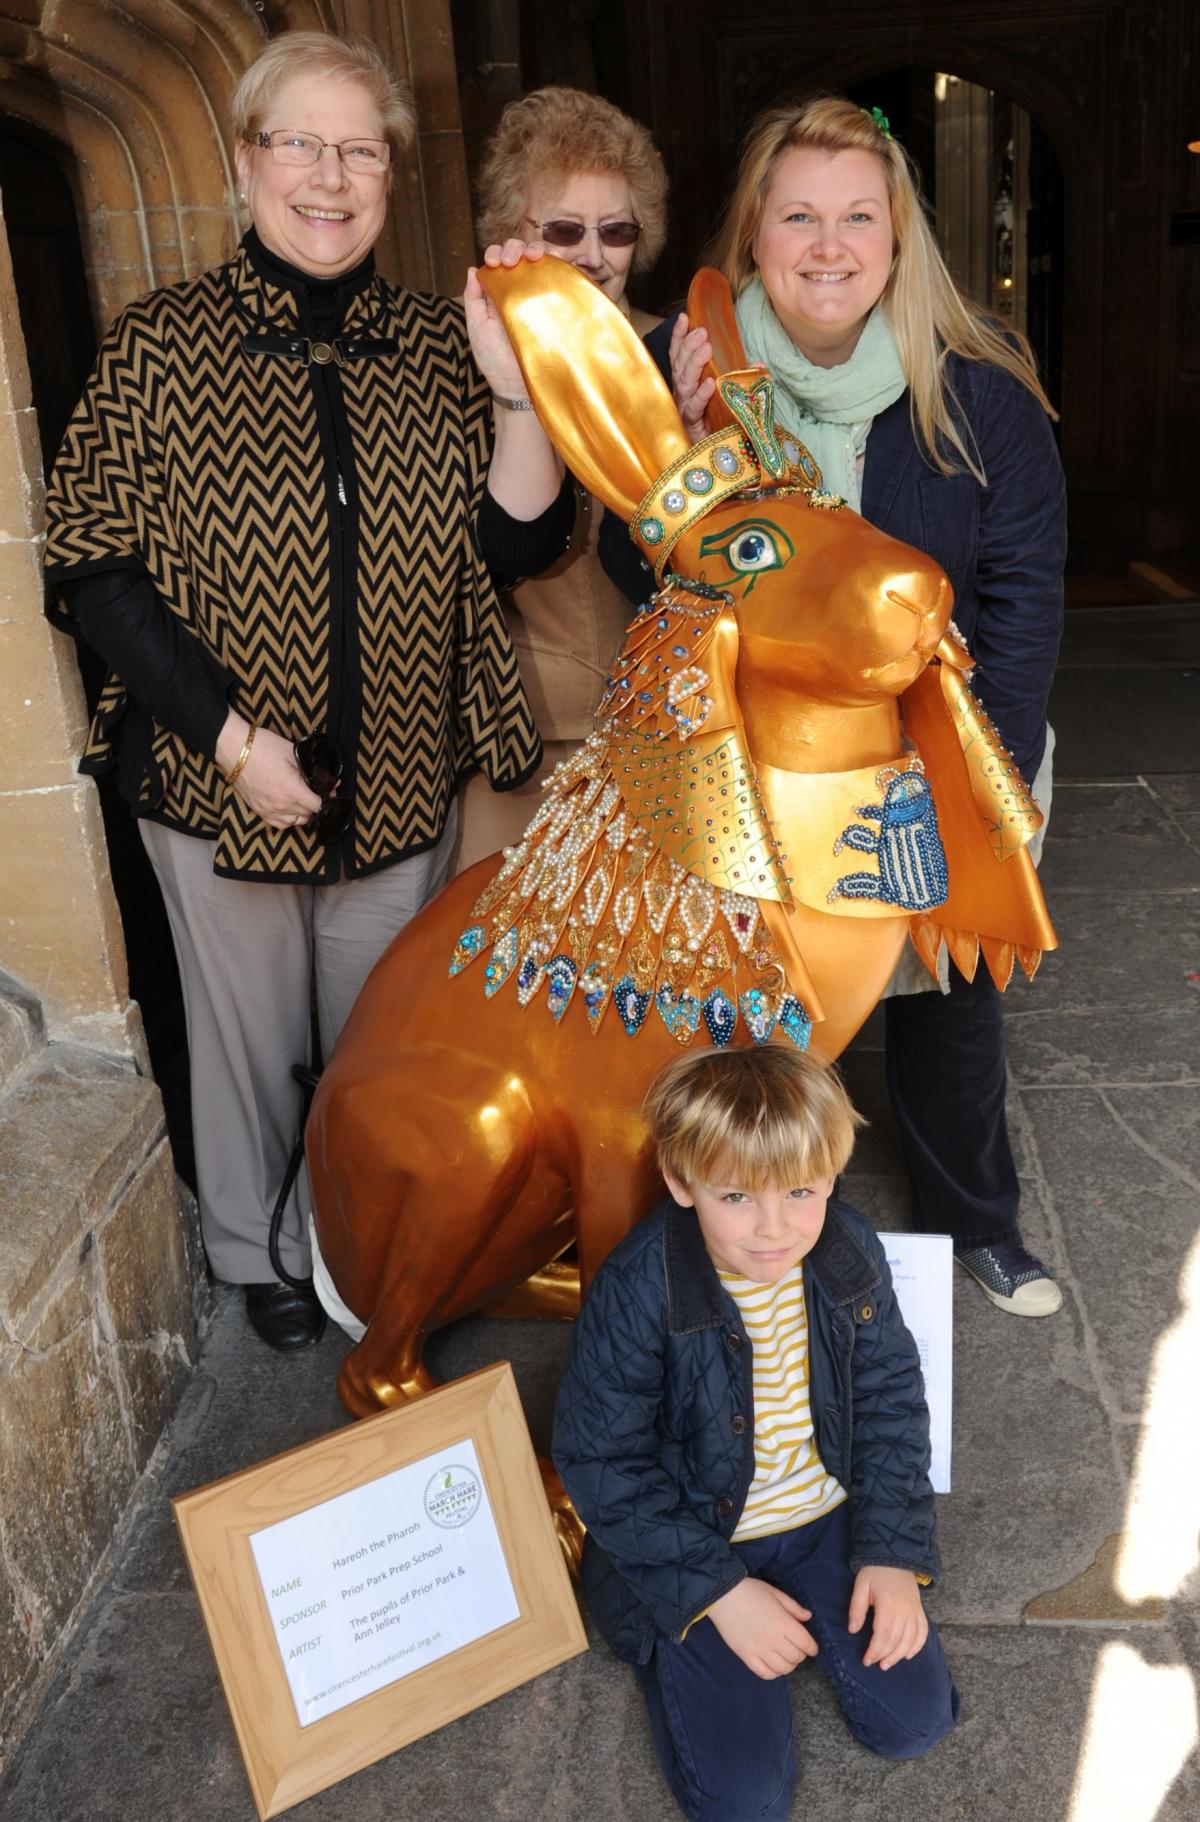 Artists Ann Jelley and Joyce Charles with their Hareoh the Pharoh with Nicky Brookes, head of art at Prior Park school and her son Oliver, 6